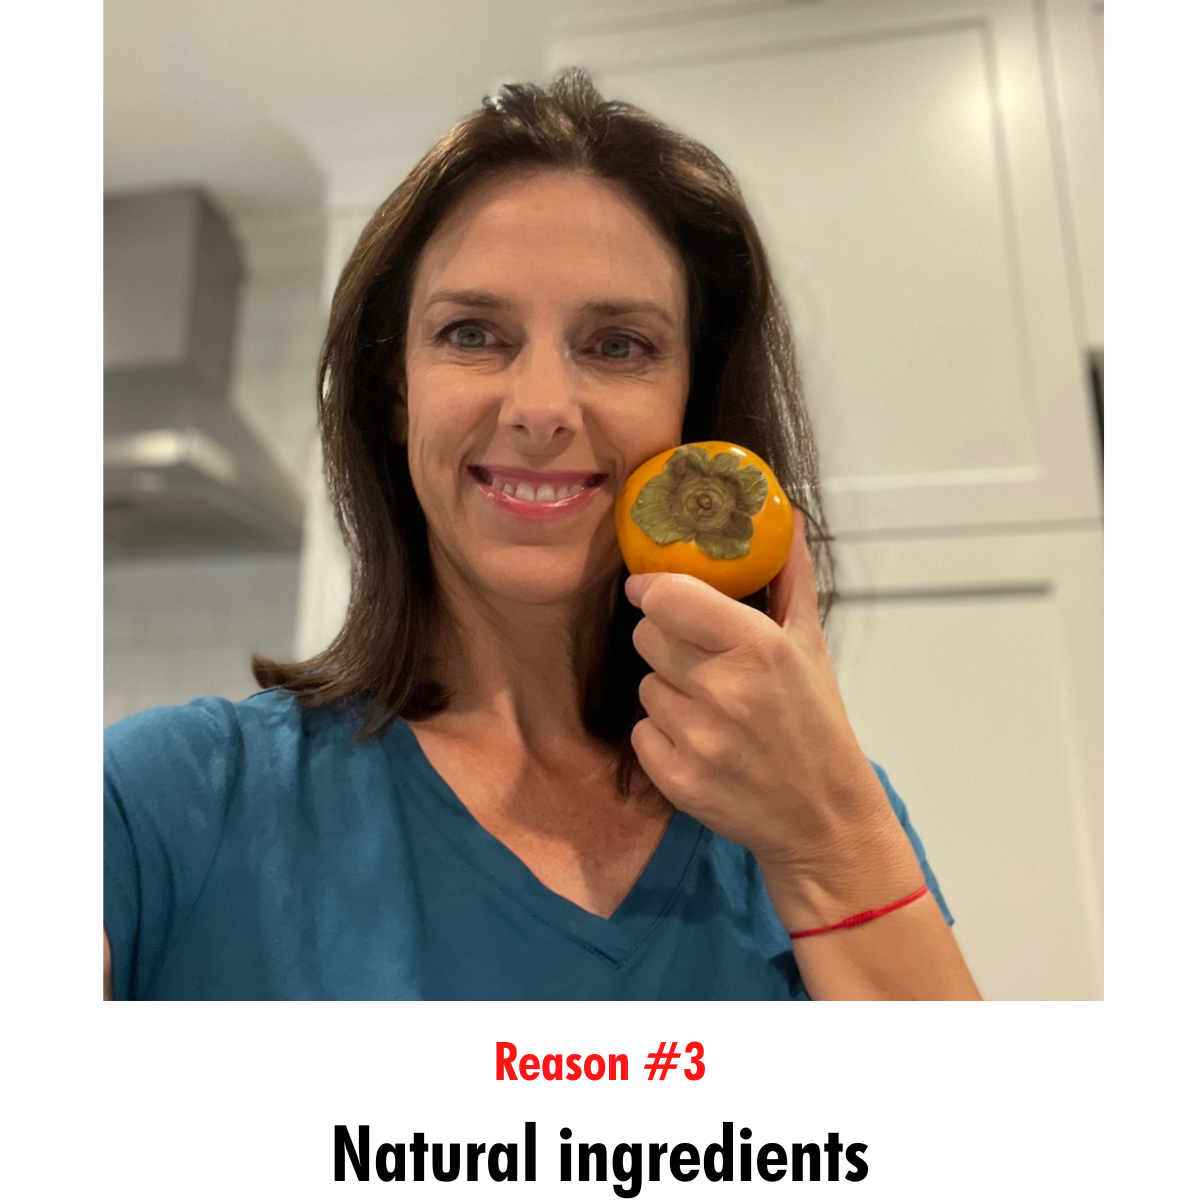 Woman holding a fresh persimmon, symbolizing the natural ingredients used in Mirai Clinical's skincare products.